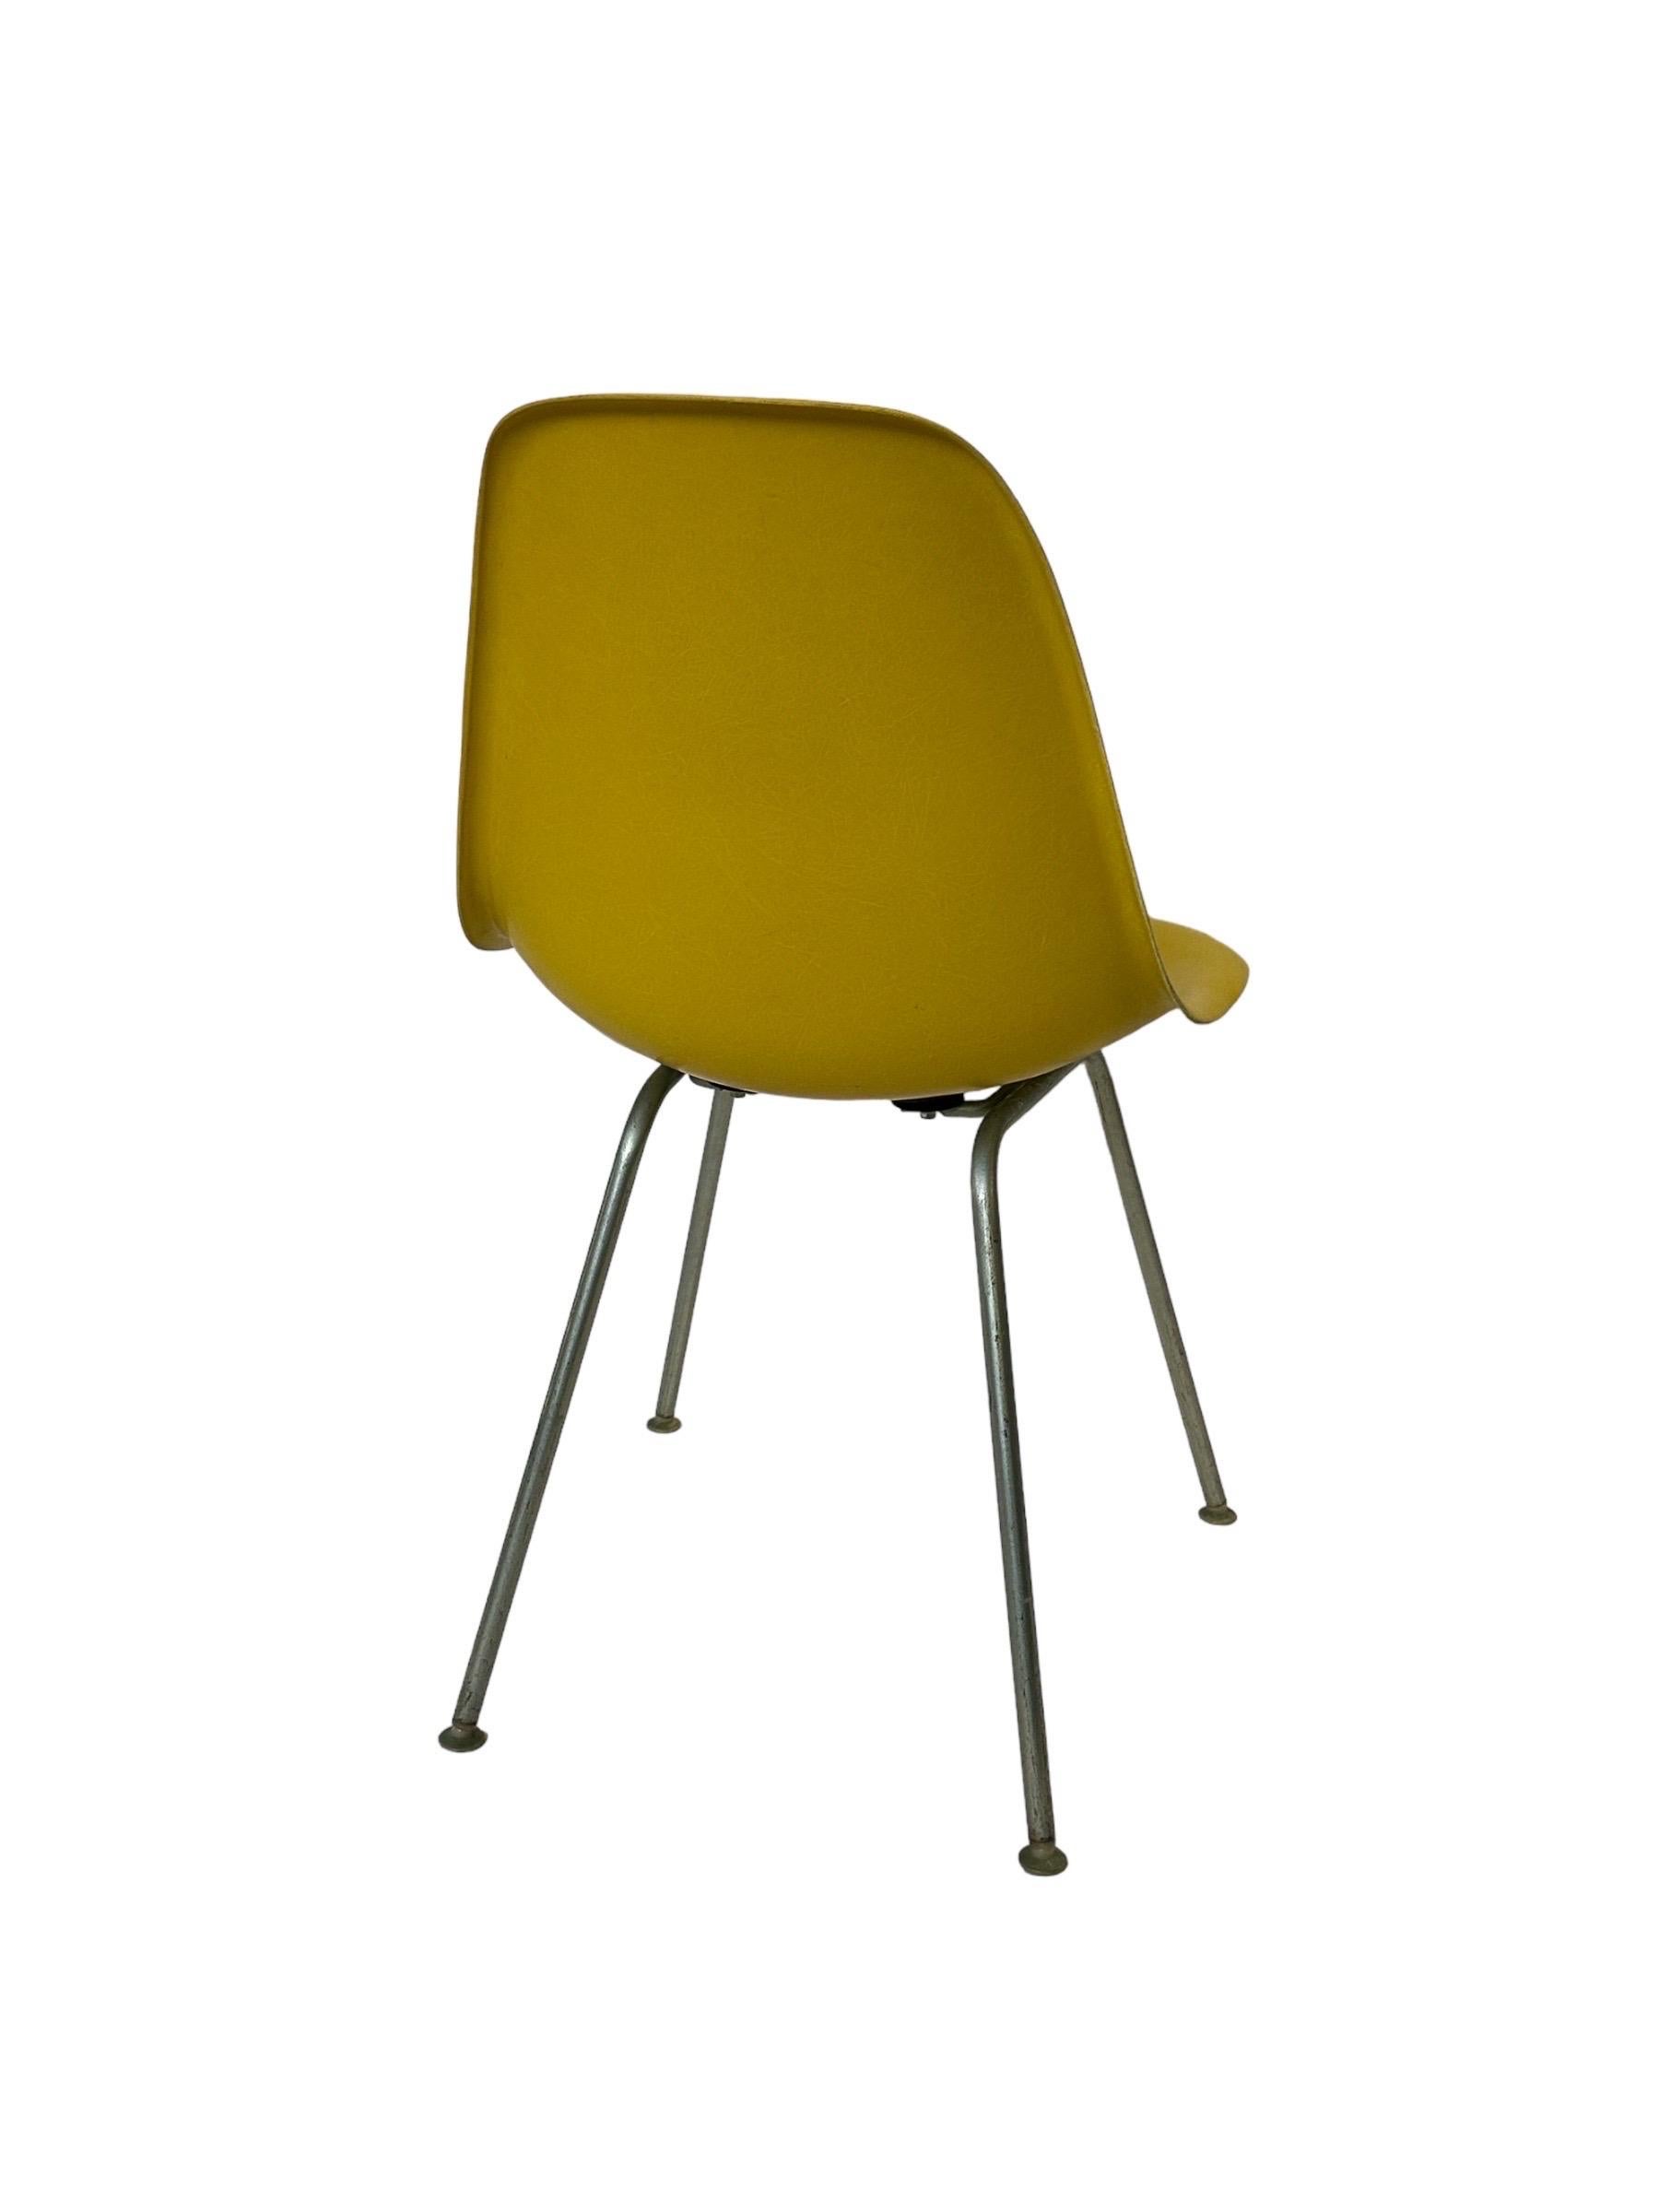 20th Century Herman Miller Eames Fiberglass Dining Chair in Brilliant Yellow For Sale